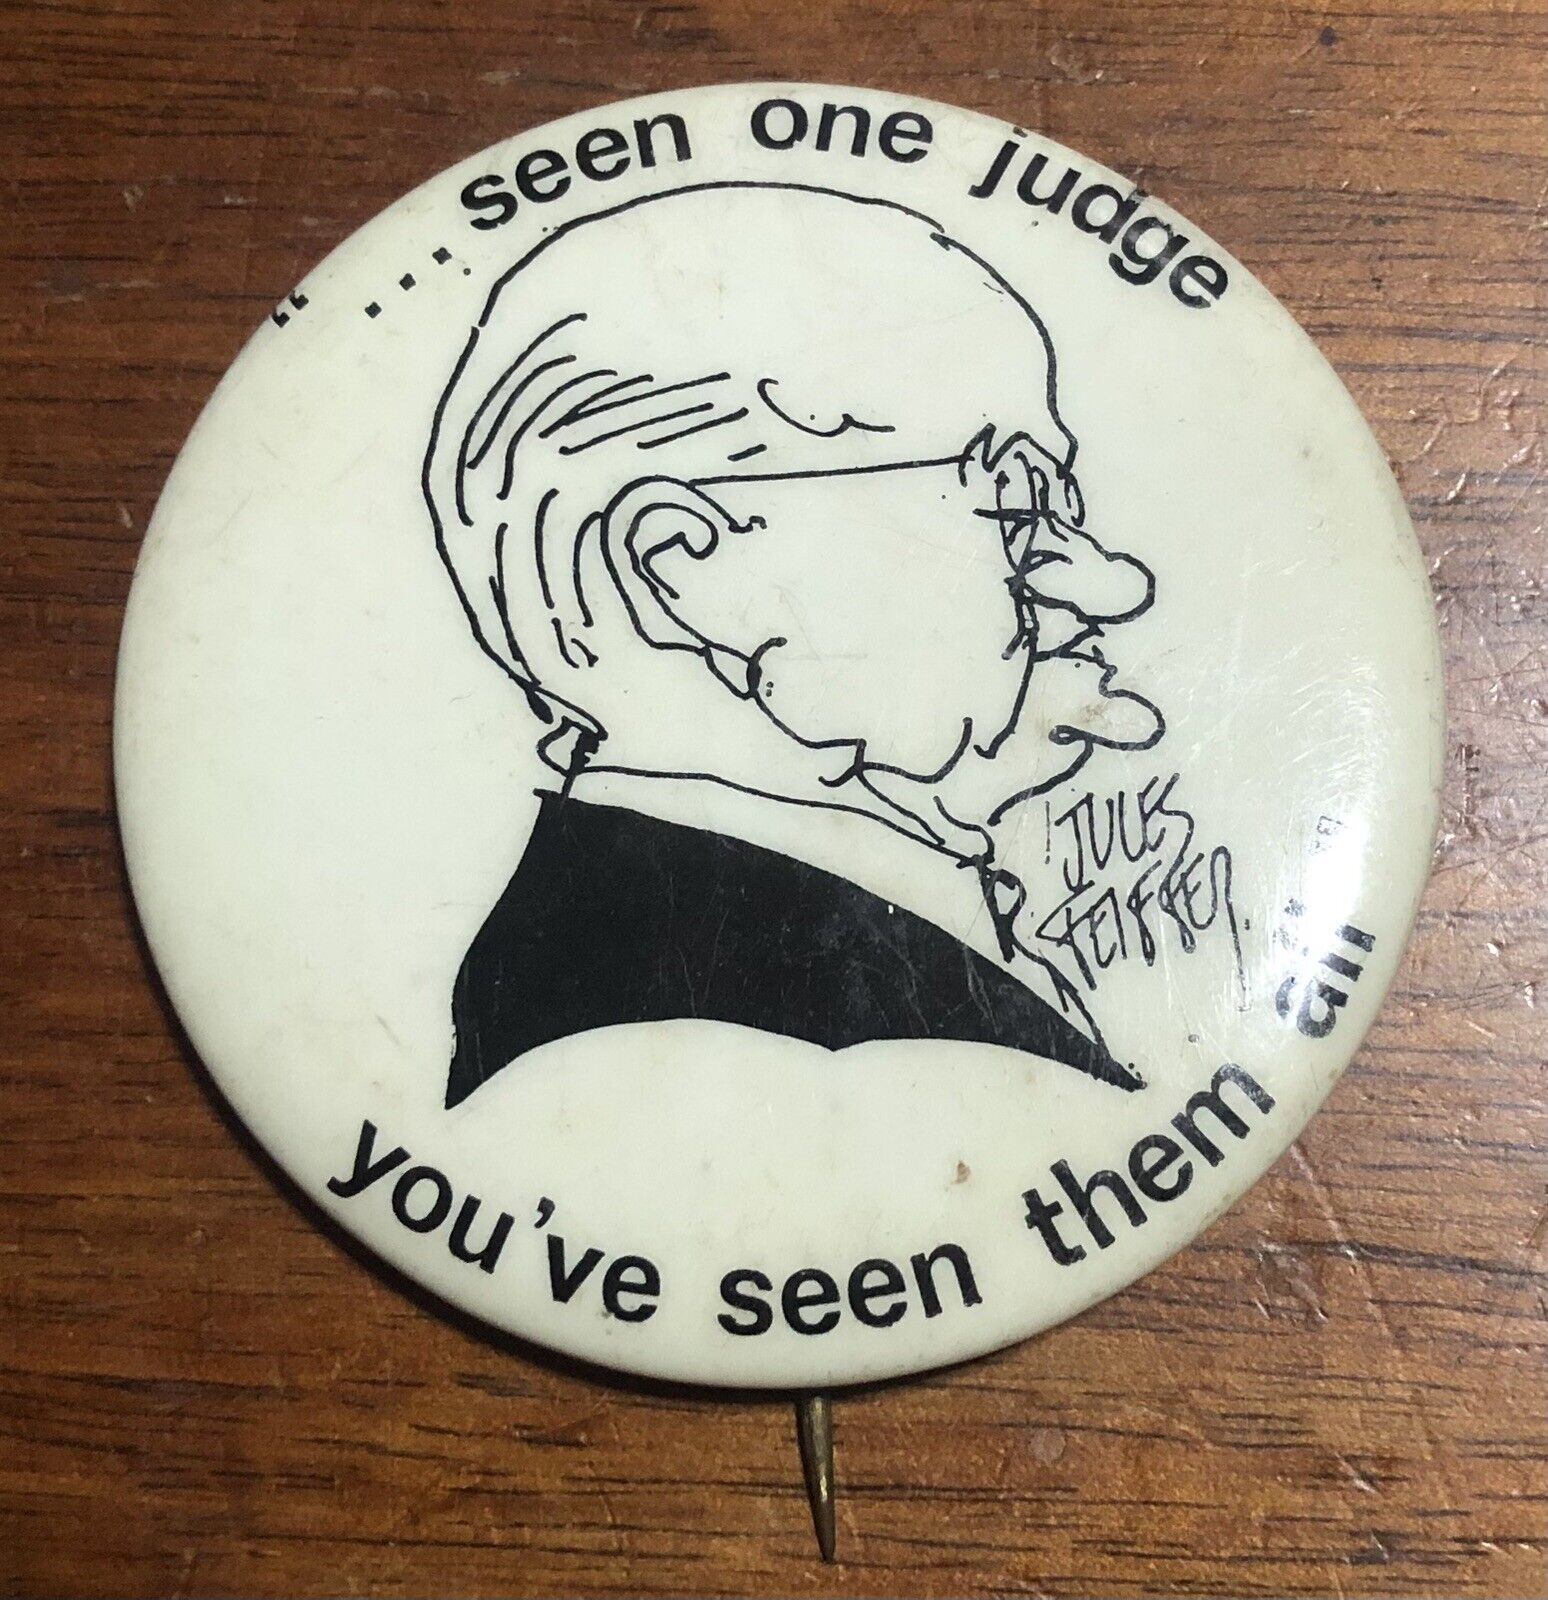 Original 1969 Chicago 7 Conspiracy Judge Trial Button by Jules Feiffer RARE Pin